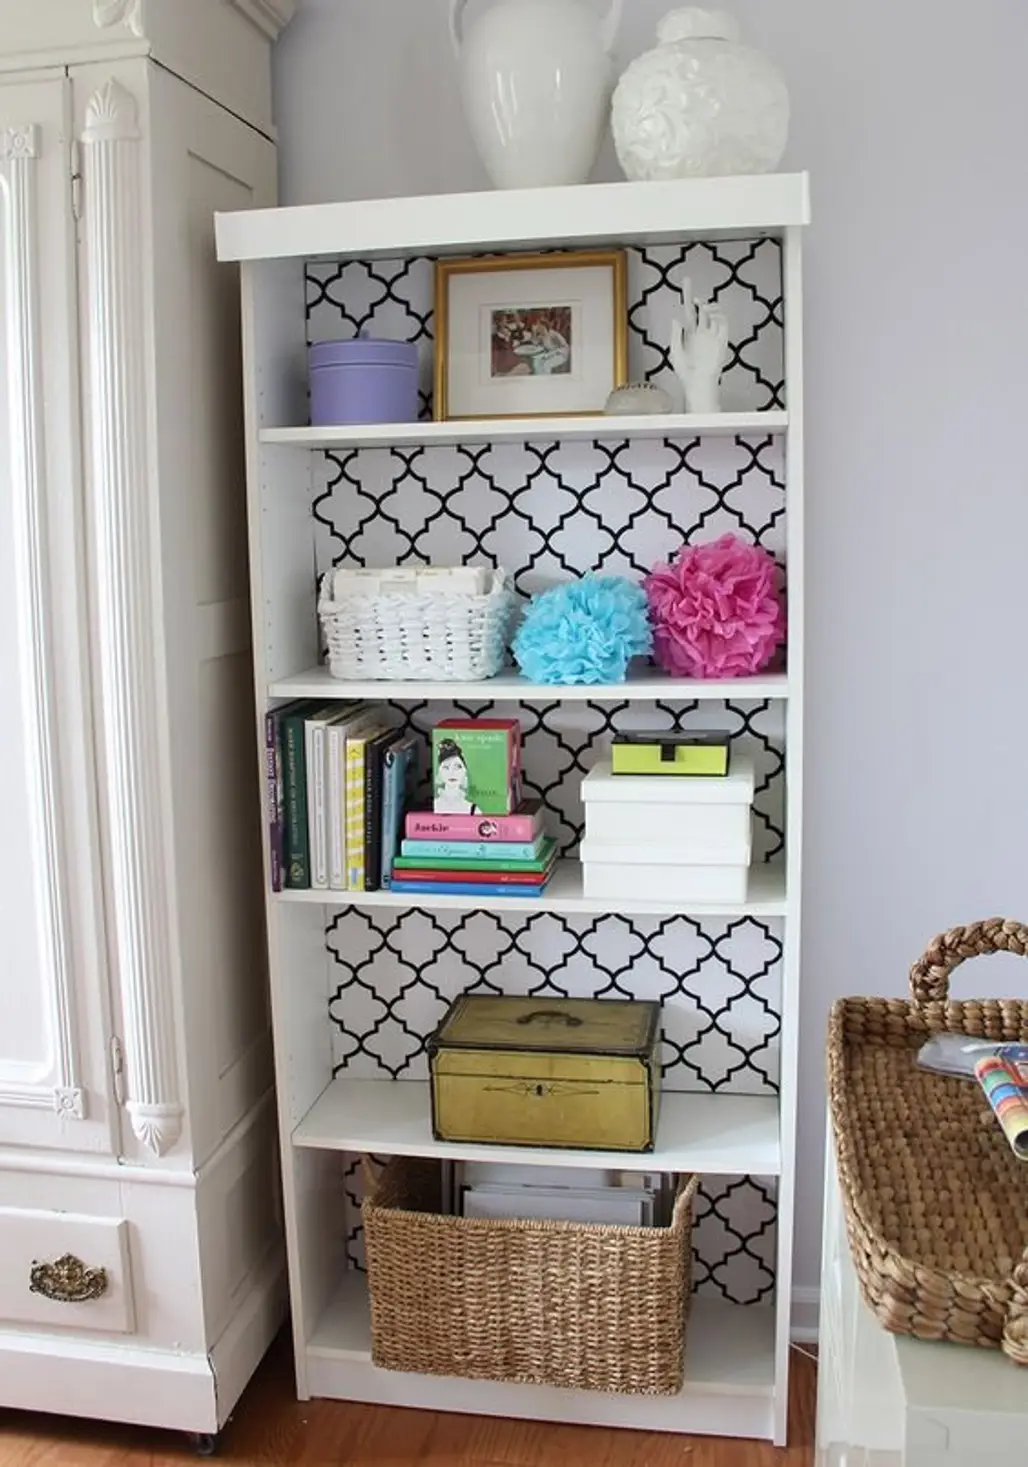 Invest in a Beautiful Bookcase over Drilling in Shelves